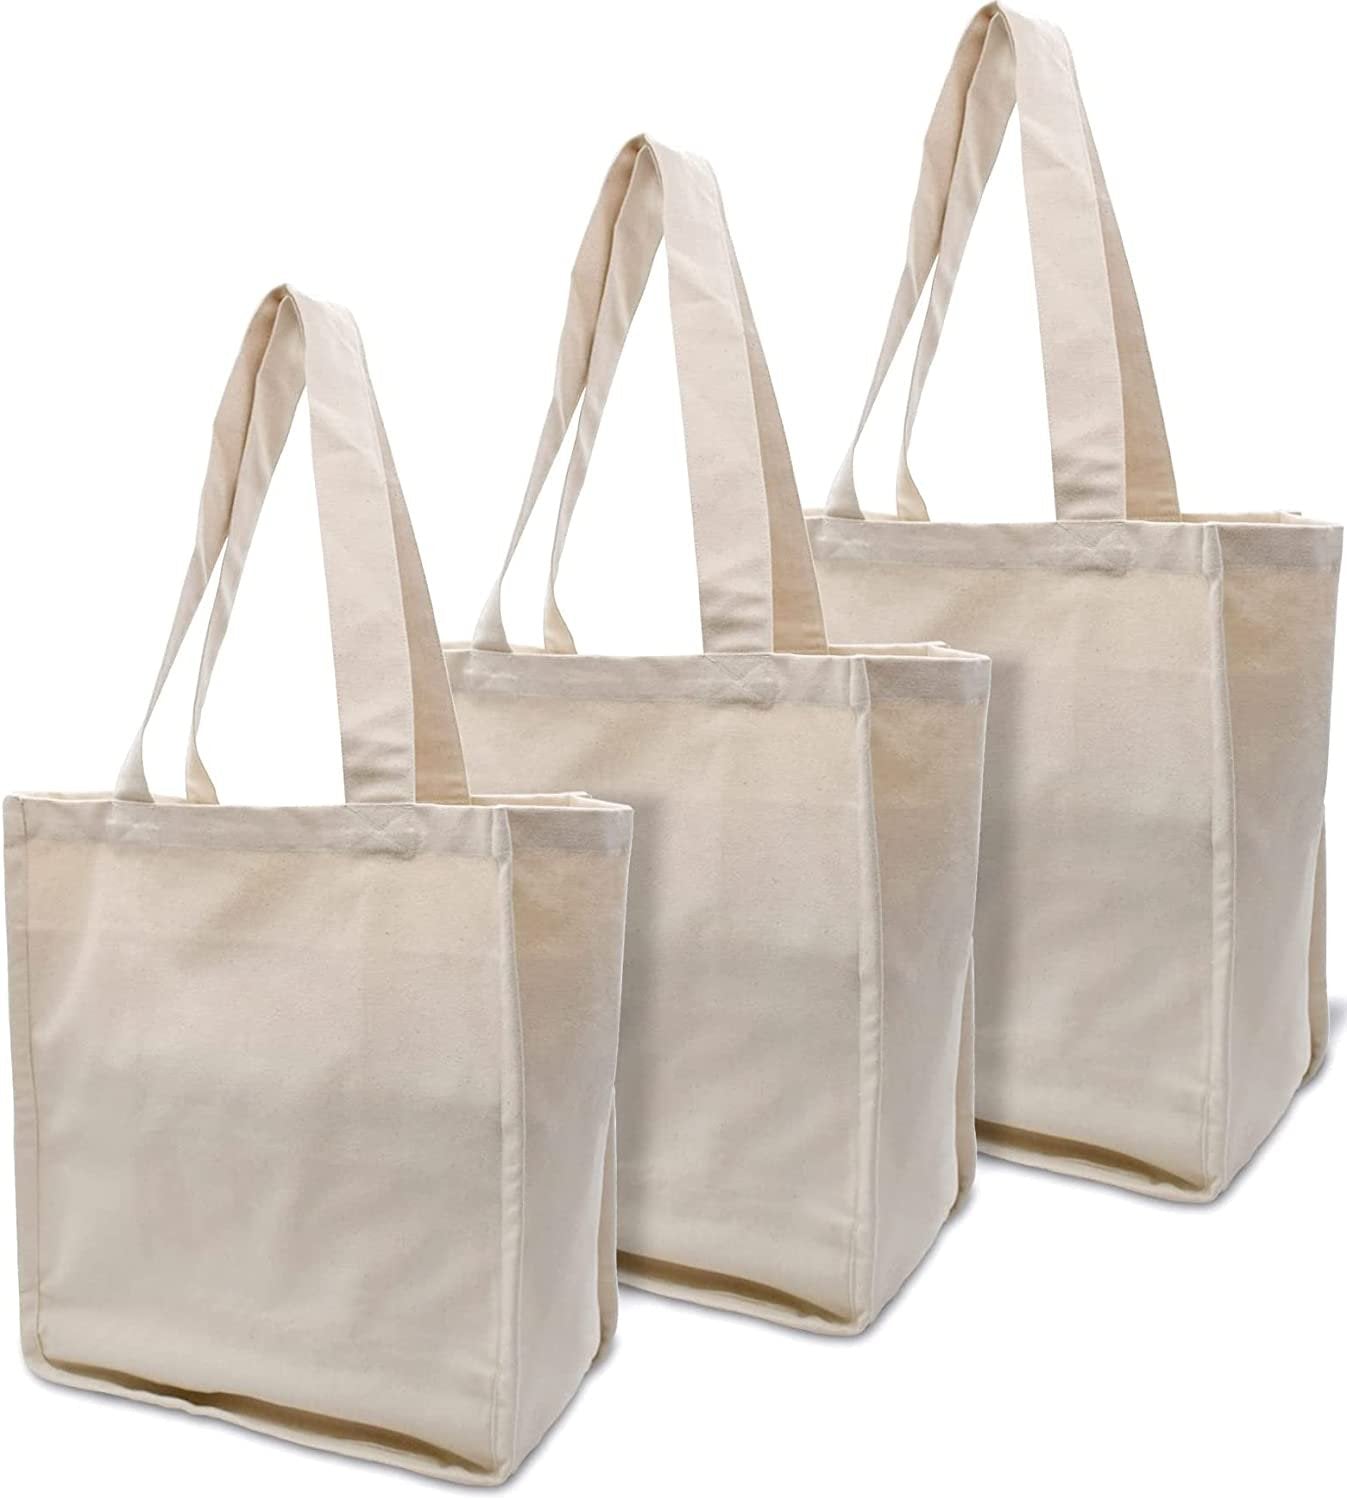 Canvas Grocery Bag - 3 Pack Large Organic Cotton Fabric Bags with Handles & Interior Pockets, Reusable Eco-Friendly Blank Cloth Totes for Groceries, Shopping, Sublimation, Travel, Bulk - 13.5x16.5x8